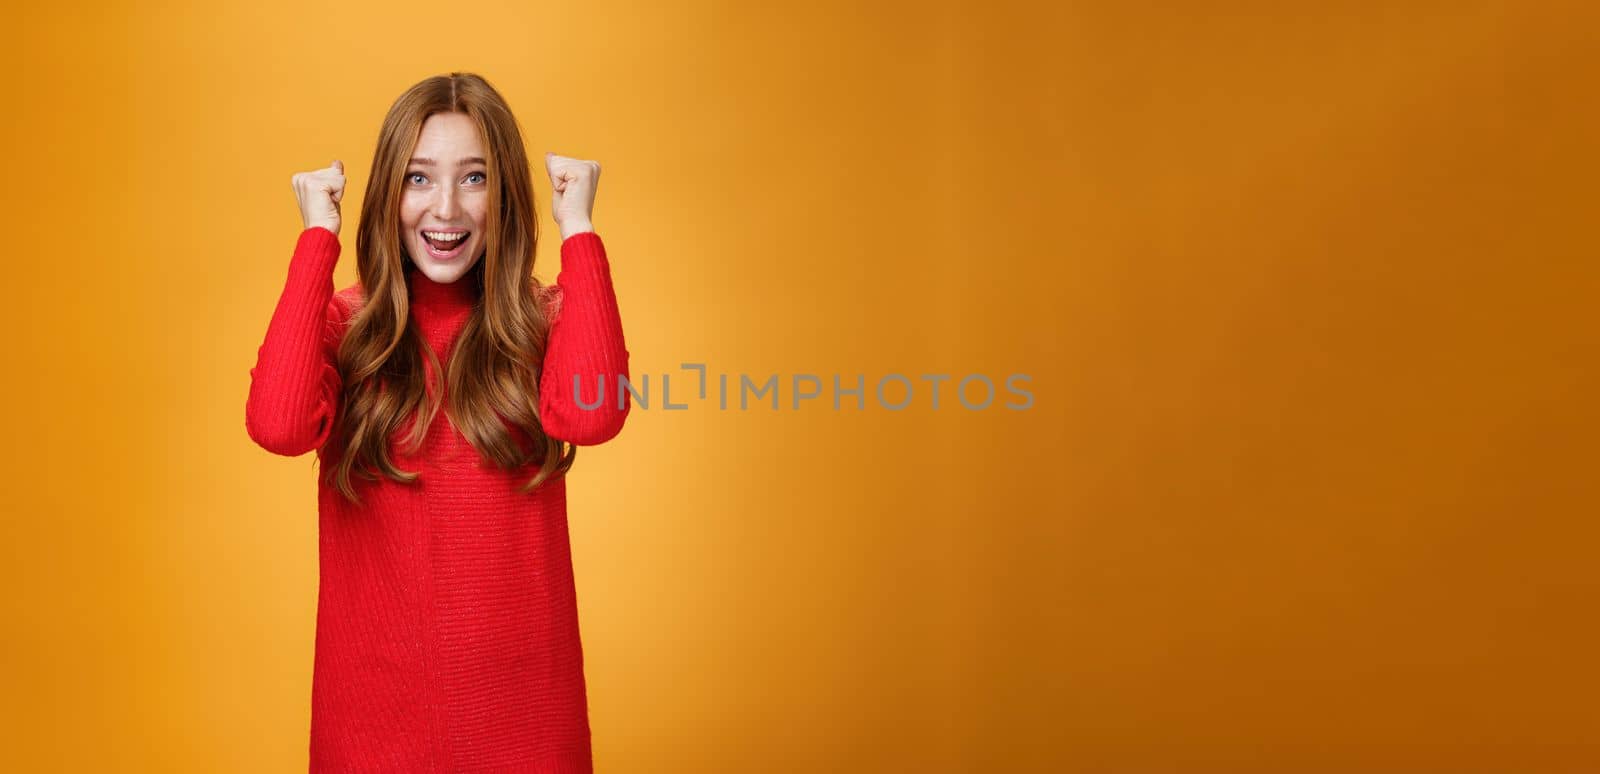 Happy delighted and cheerful ginger girl with freckles and blue eyes triumphing yelling yes with broad smile clenching raised fists in joy and celebration of success against orange background. Copy space